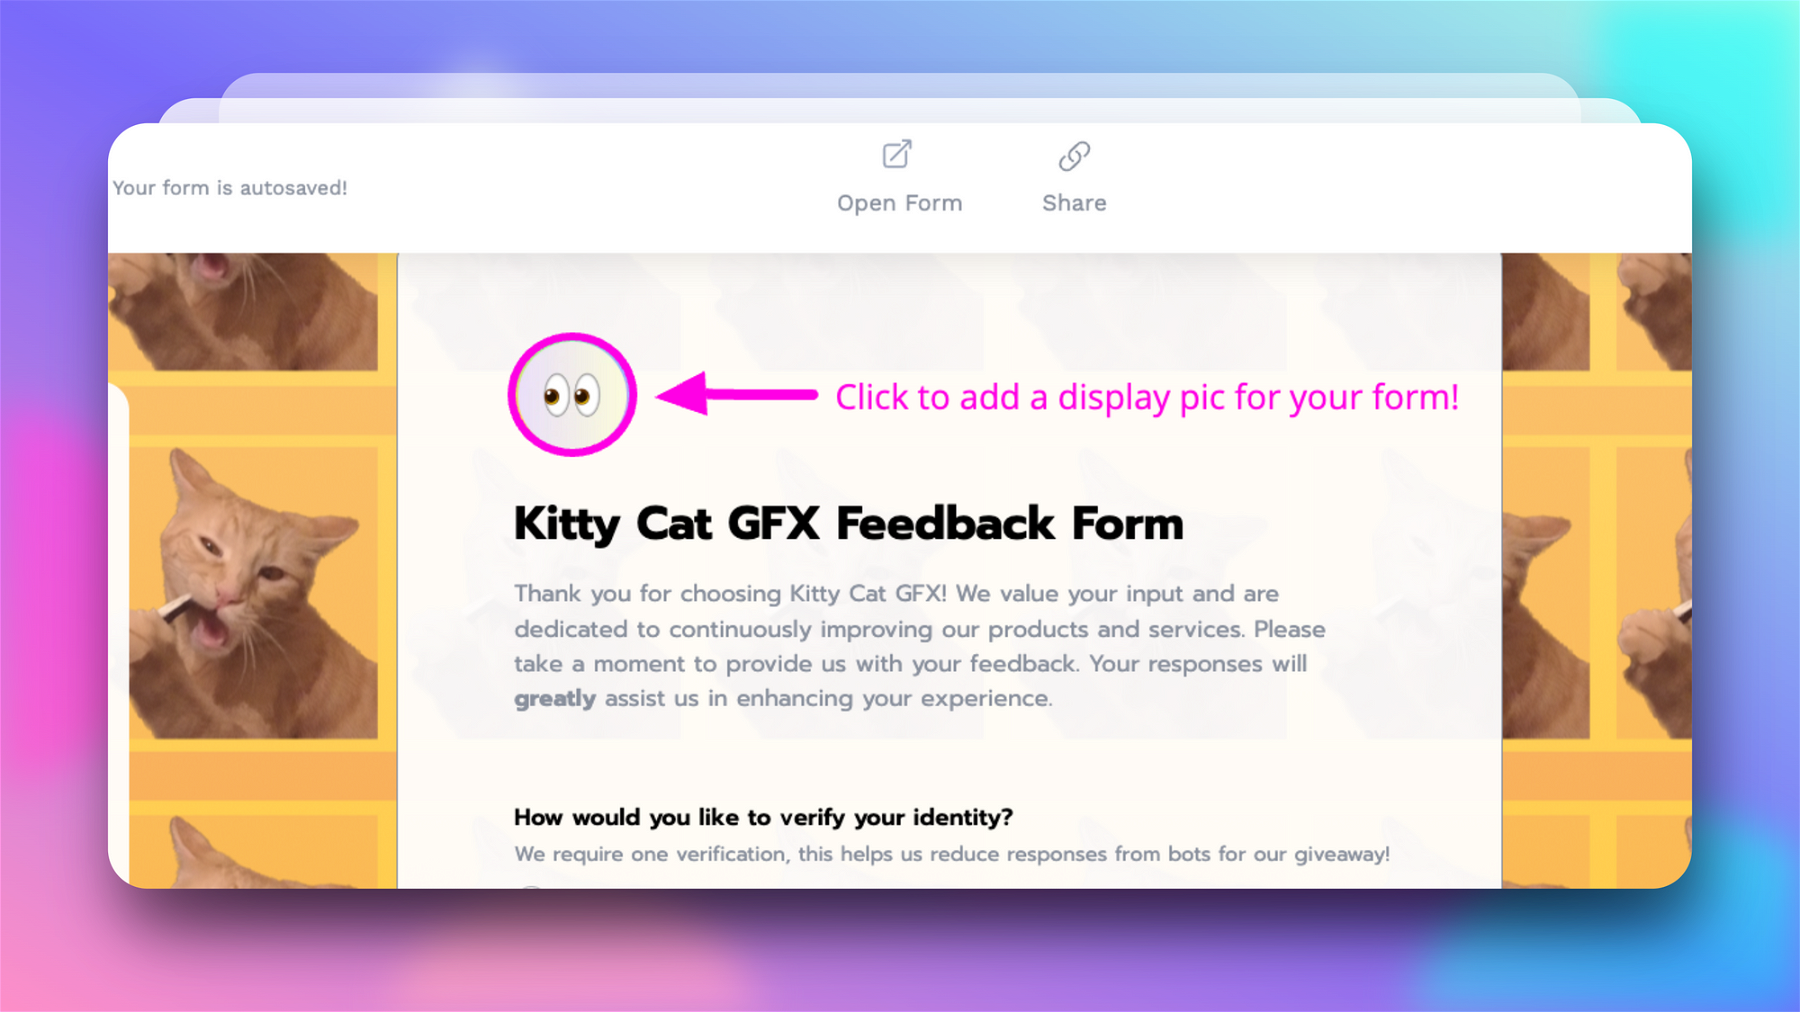 An example of a styled form using the Prompt font and custom background image. You can even change the display photo by clicking the icon pictured in the screenshot.